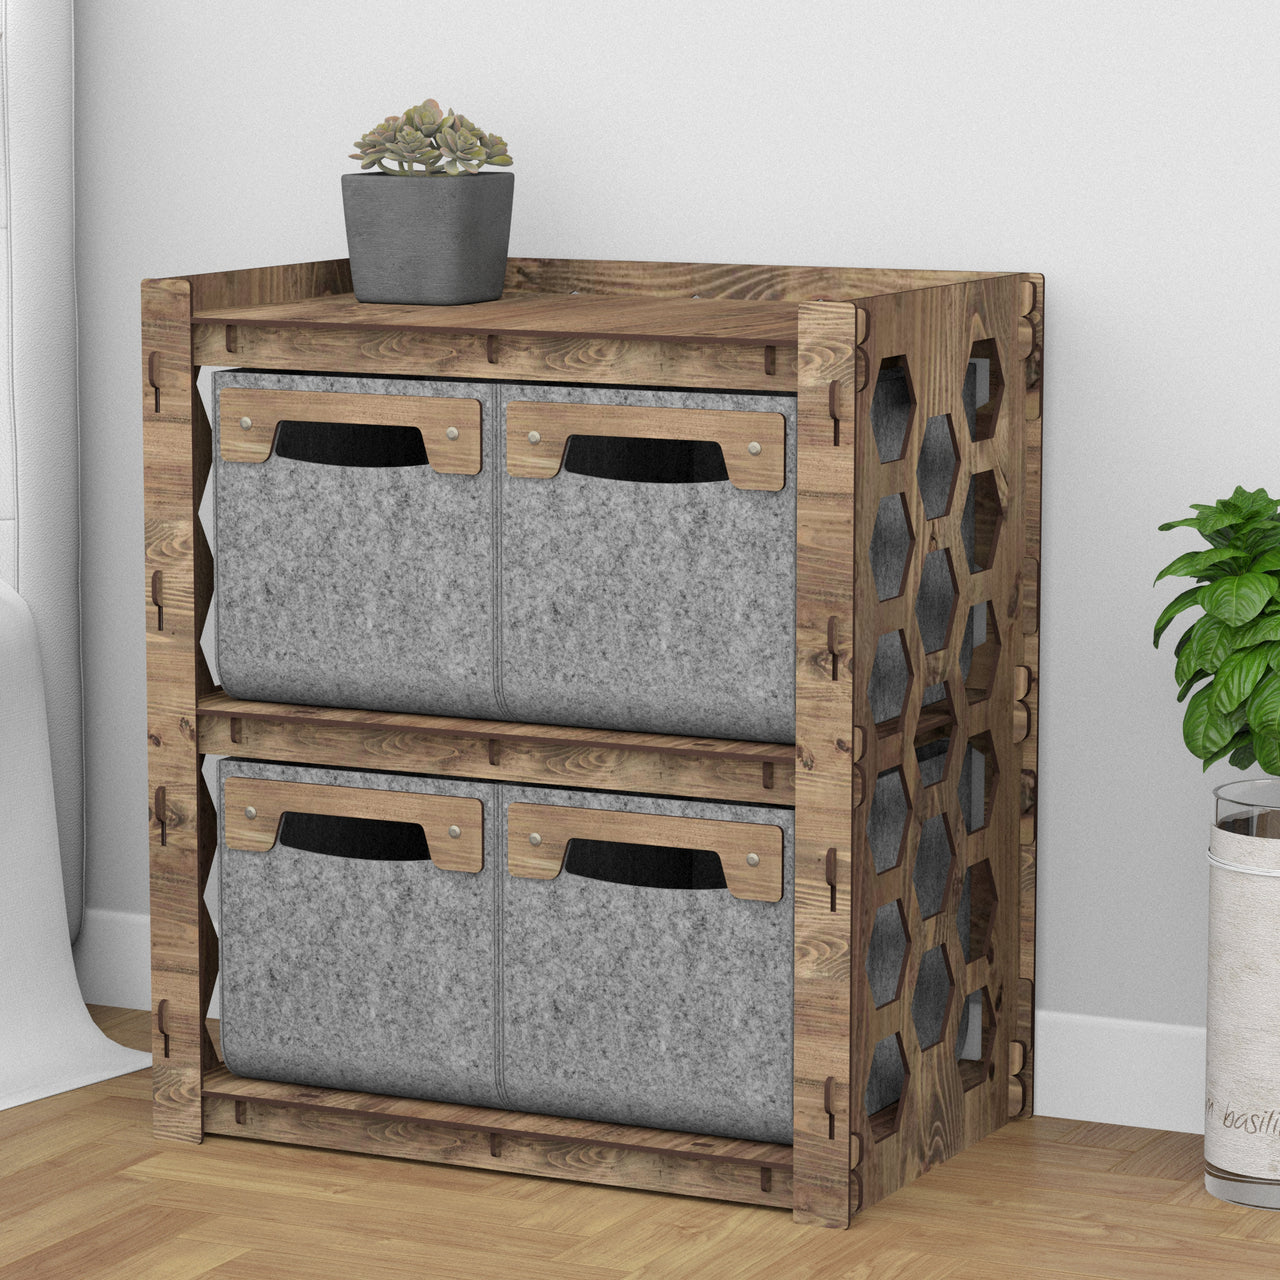 Honeycomb Bedside Table Nightstand 4 Drawers [4 SMALL GRAY BINS]